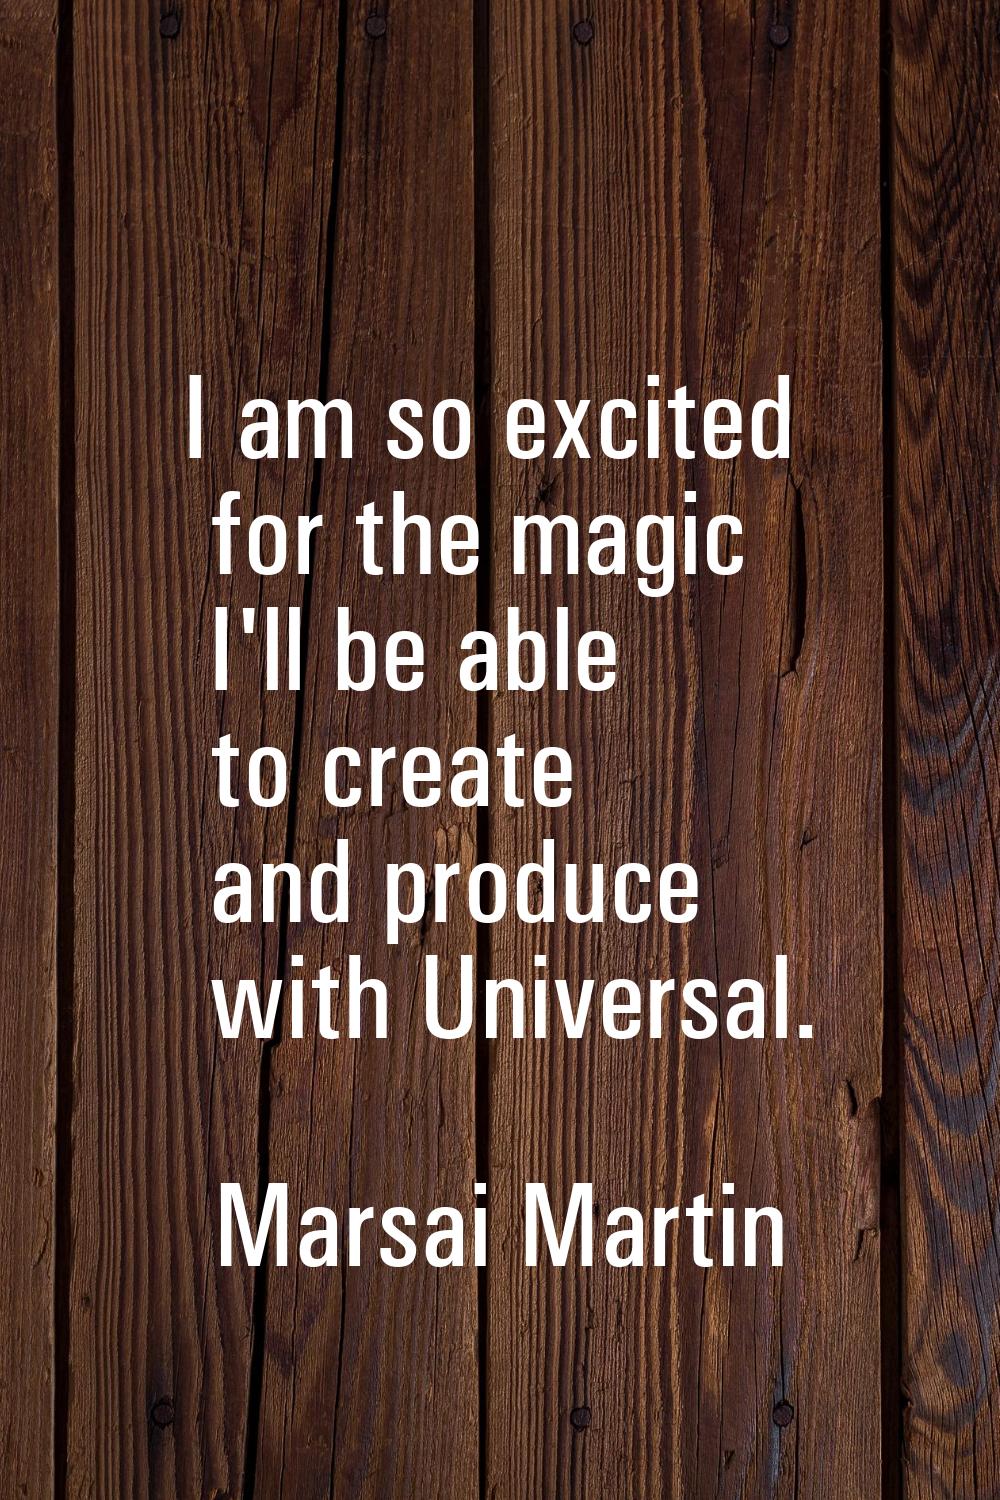 I am so excited for the magic I'll be able to create and produce with Universal.